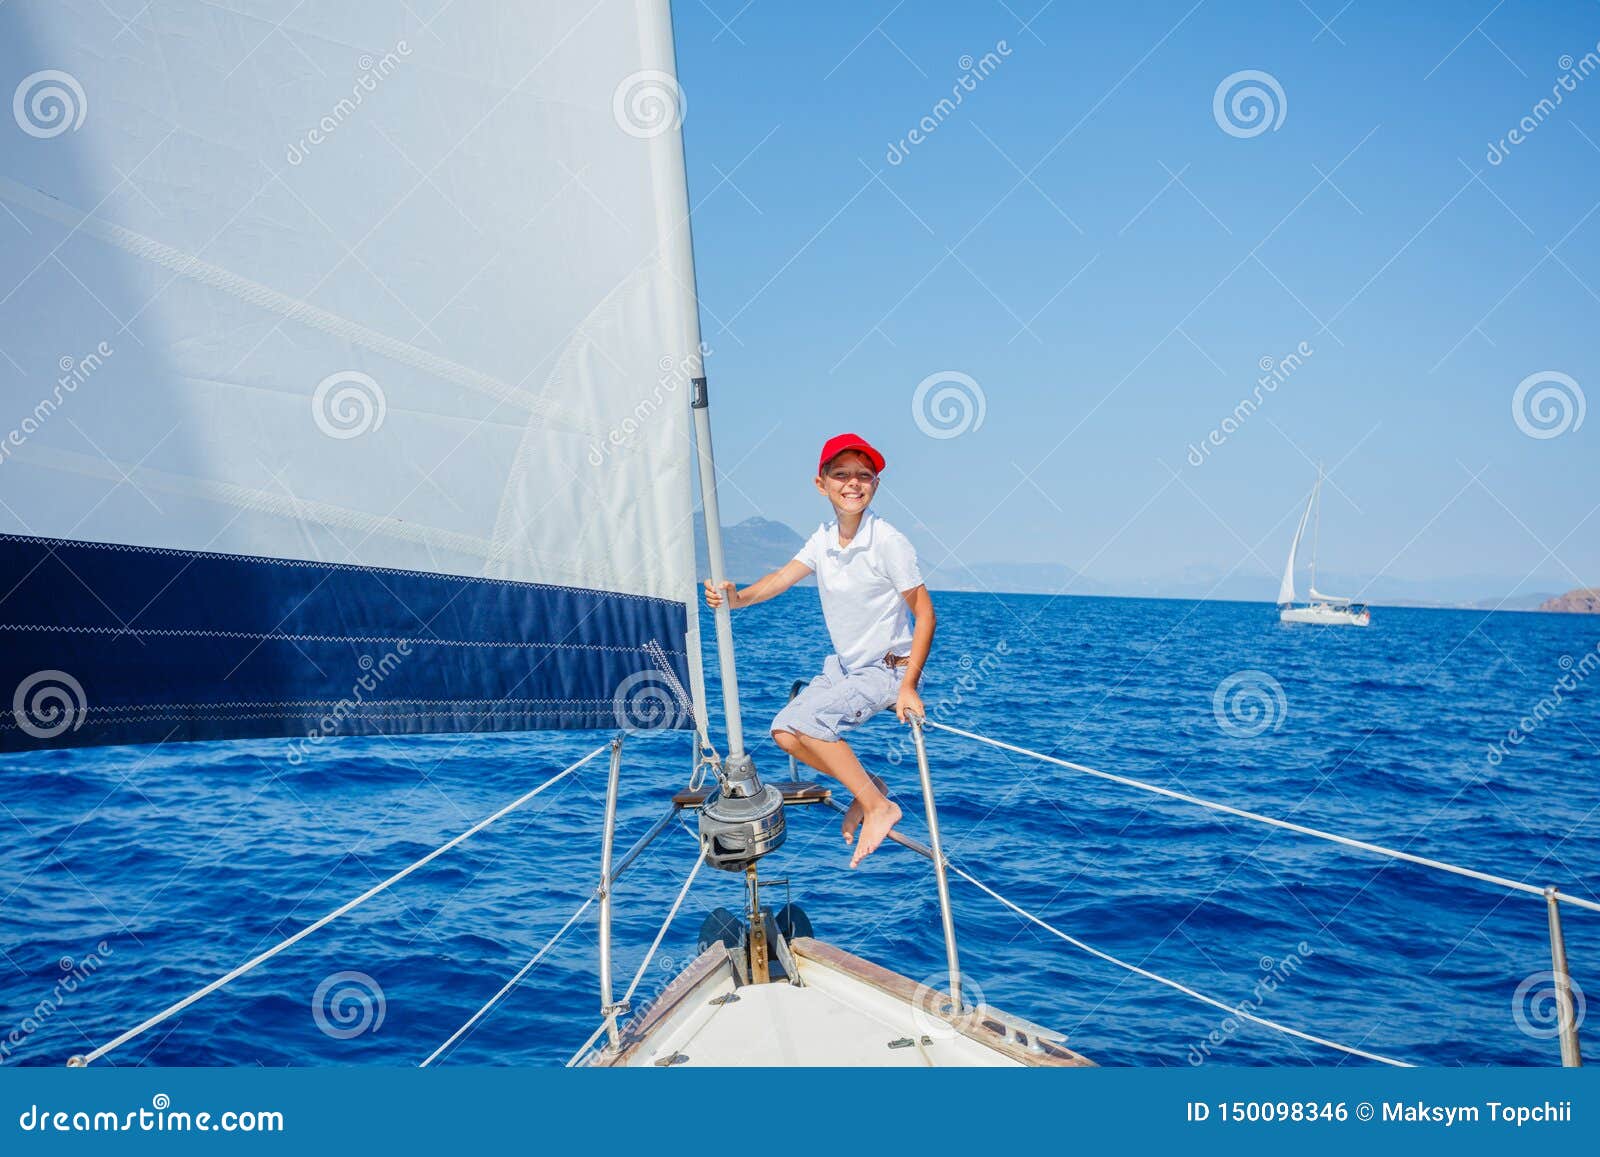 little boy on board of sailing yacht on summer cruise. travel adventure, yachting with child on family vacation.